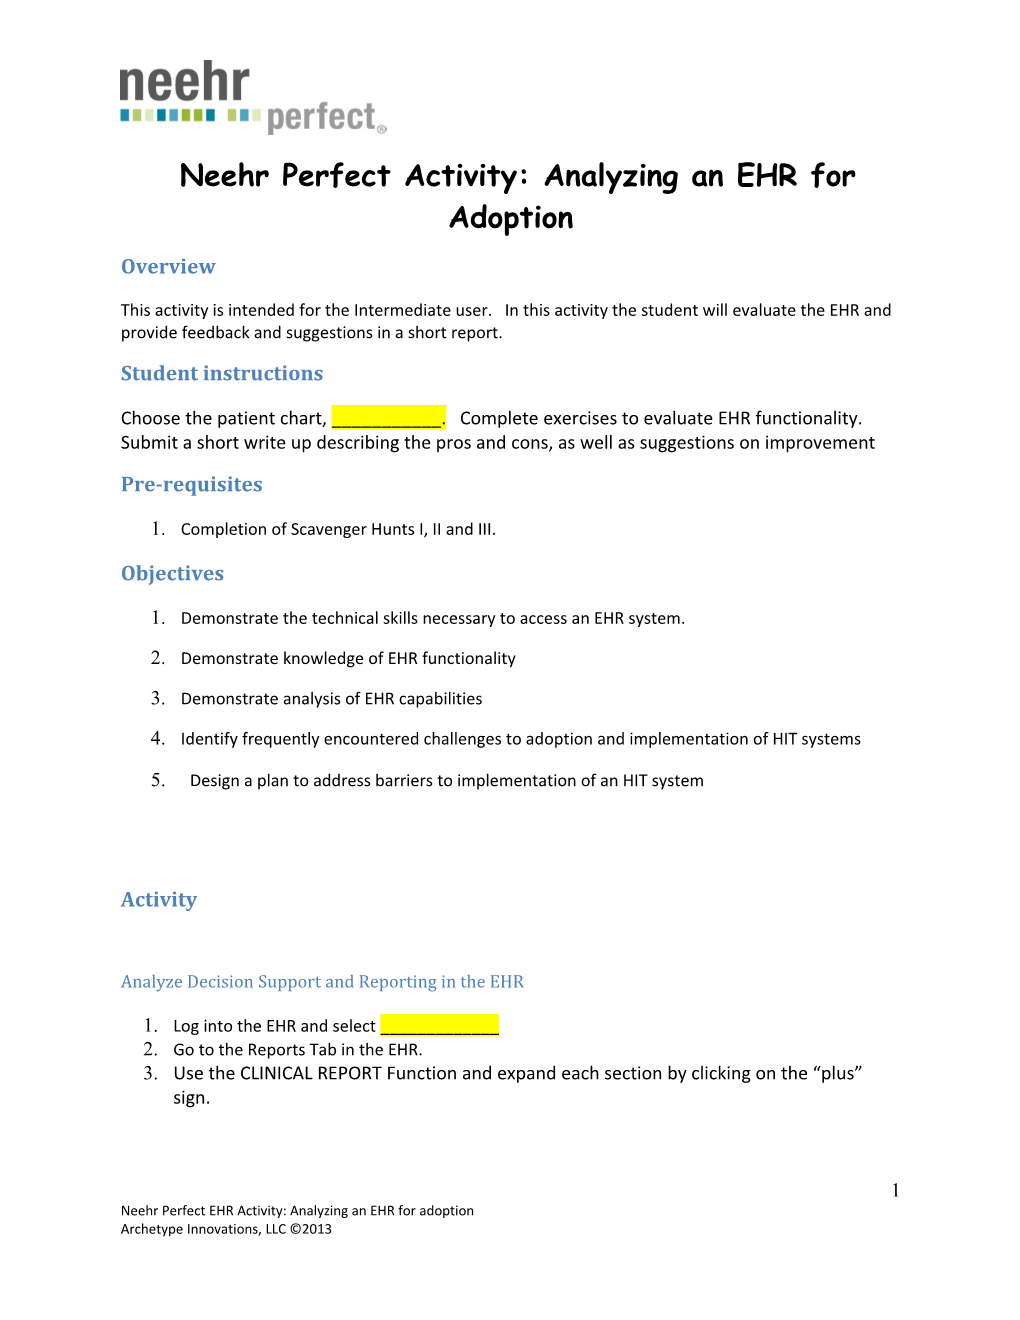 Neehr Perfect Activity: Analyzing an EHR for Adoption